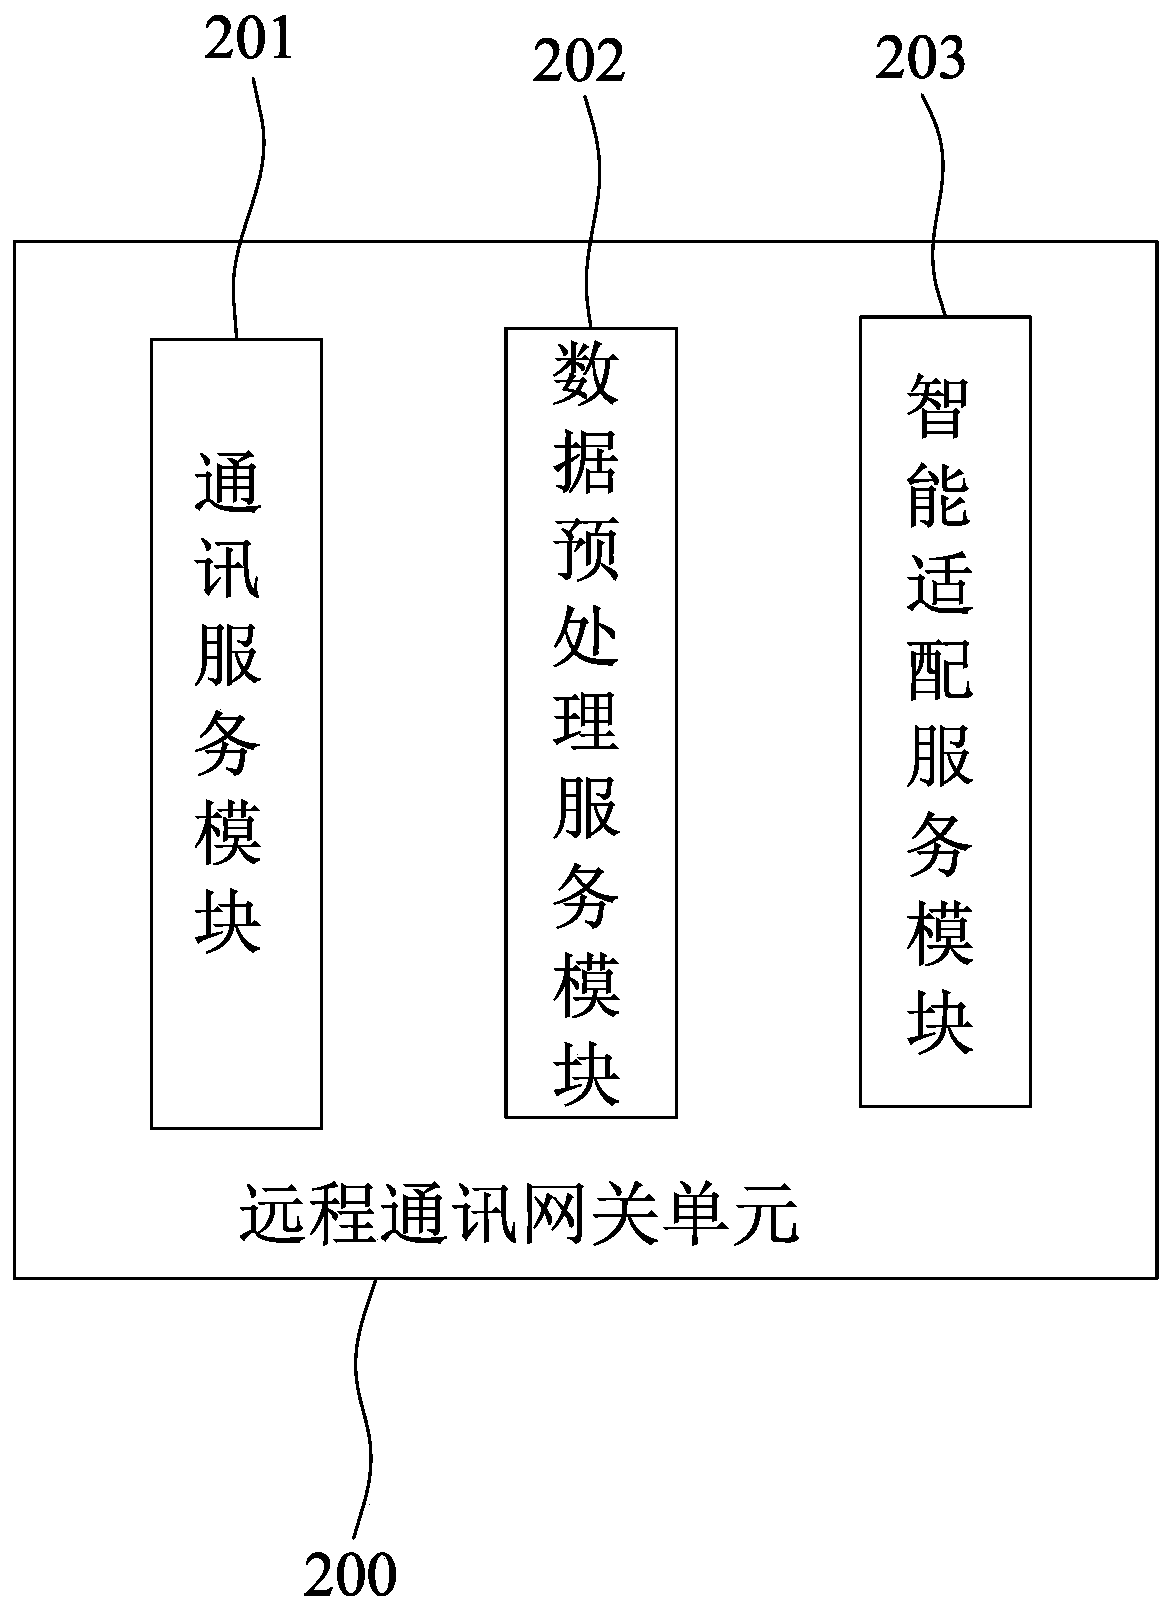 A remote monitoring and fault diagnosis system and fault diagnosis method based on cloud service